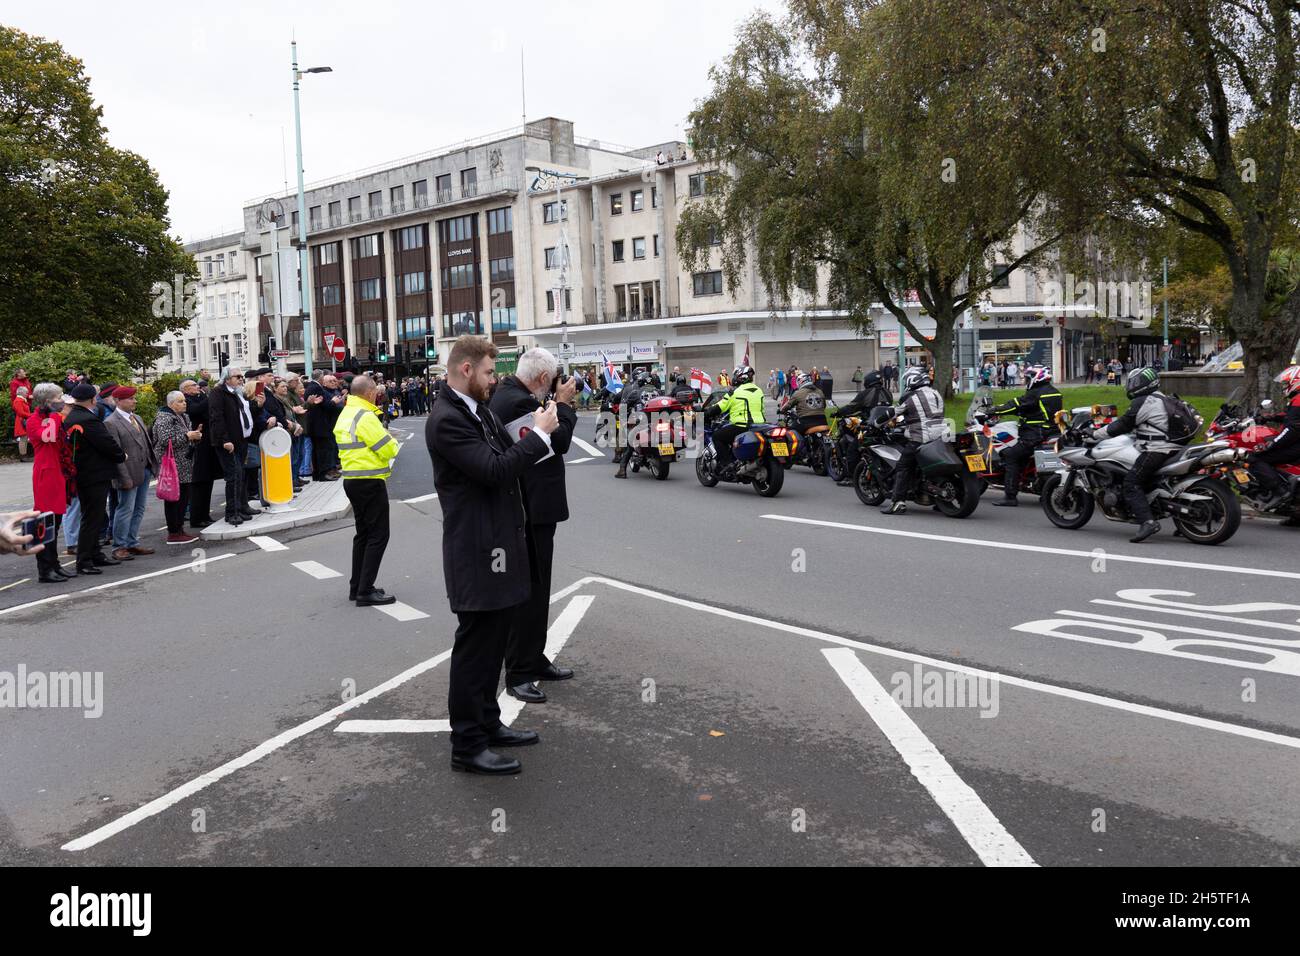 Dennis Hutchings Funeral 11/11/2021 British Soldier, Bikes and crowds arriving Stock Photo